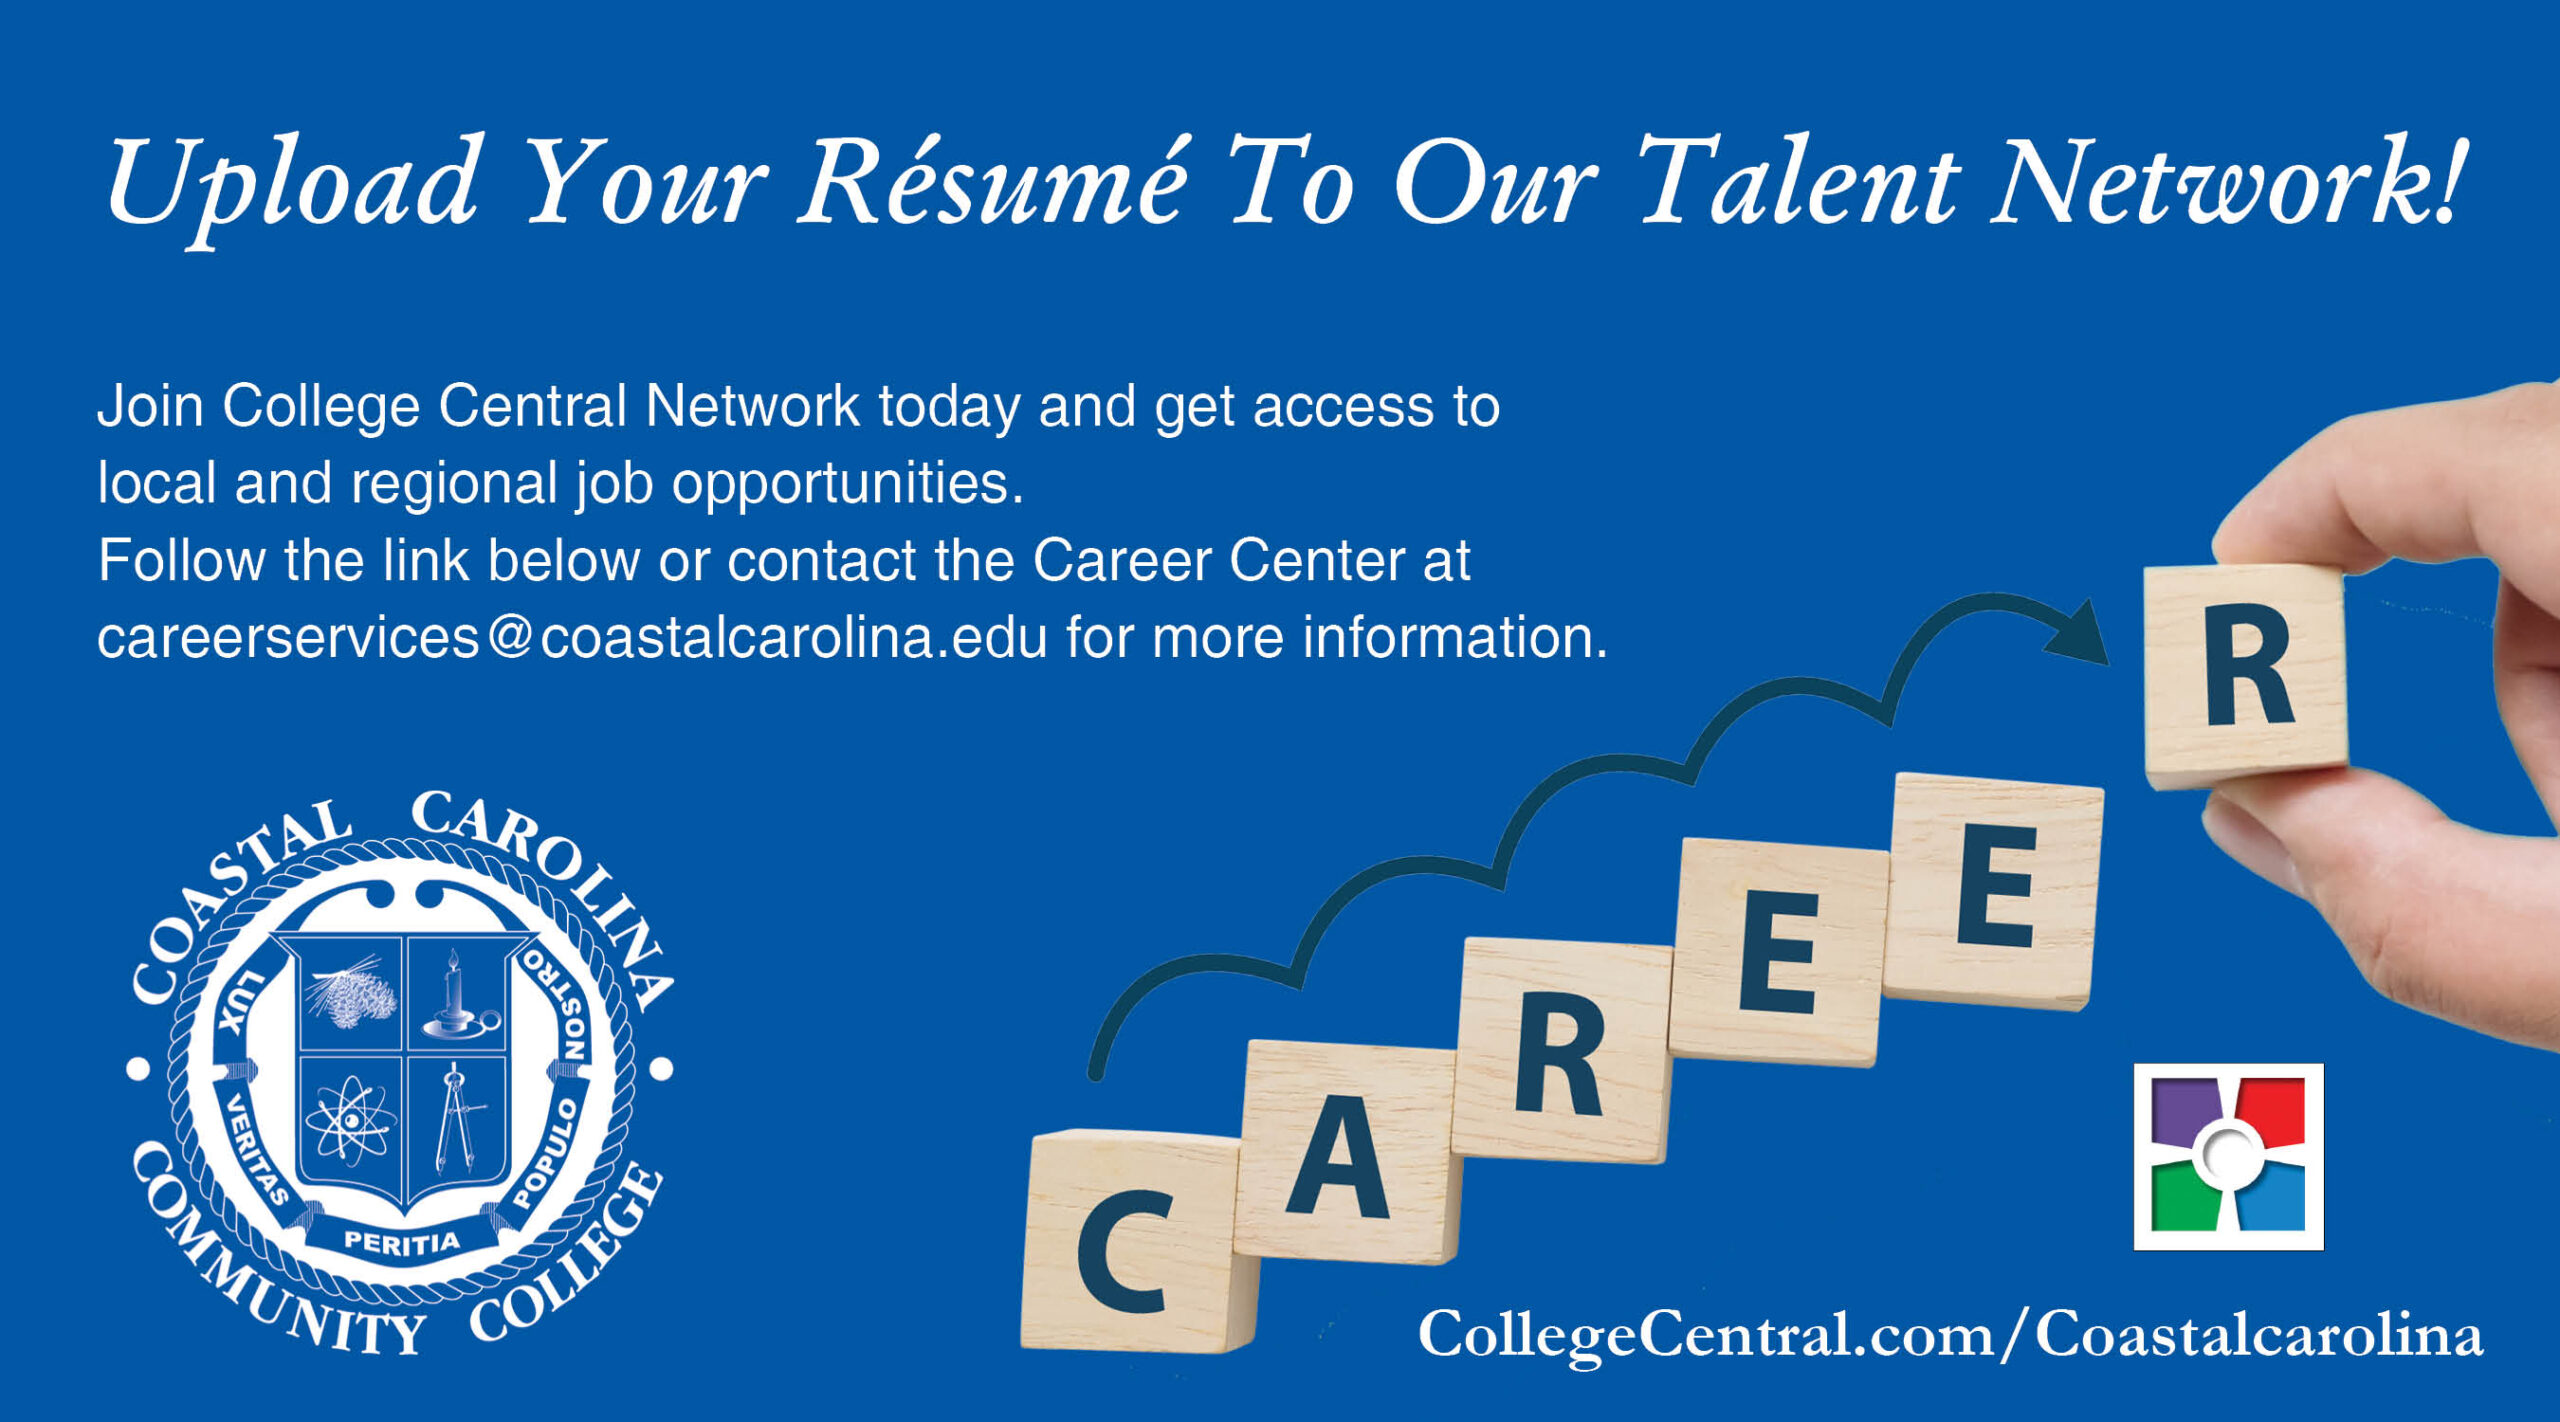 Upload Your Resume to our Talent Network! Join College Central Network today and get access to local and regional job opportunities. Follow the link below or contact the Career Center at careerservices@coastalcarolina.edu for more information. CollegeCentral.com/Coastalcarolina